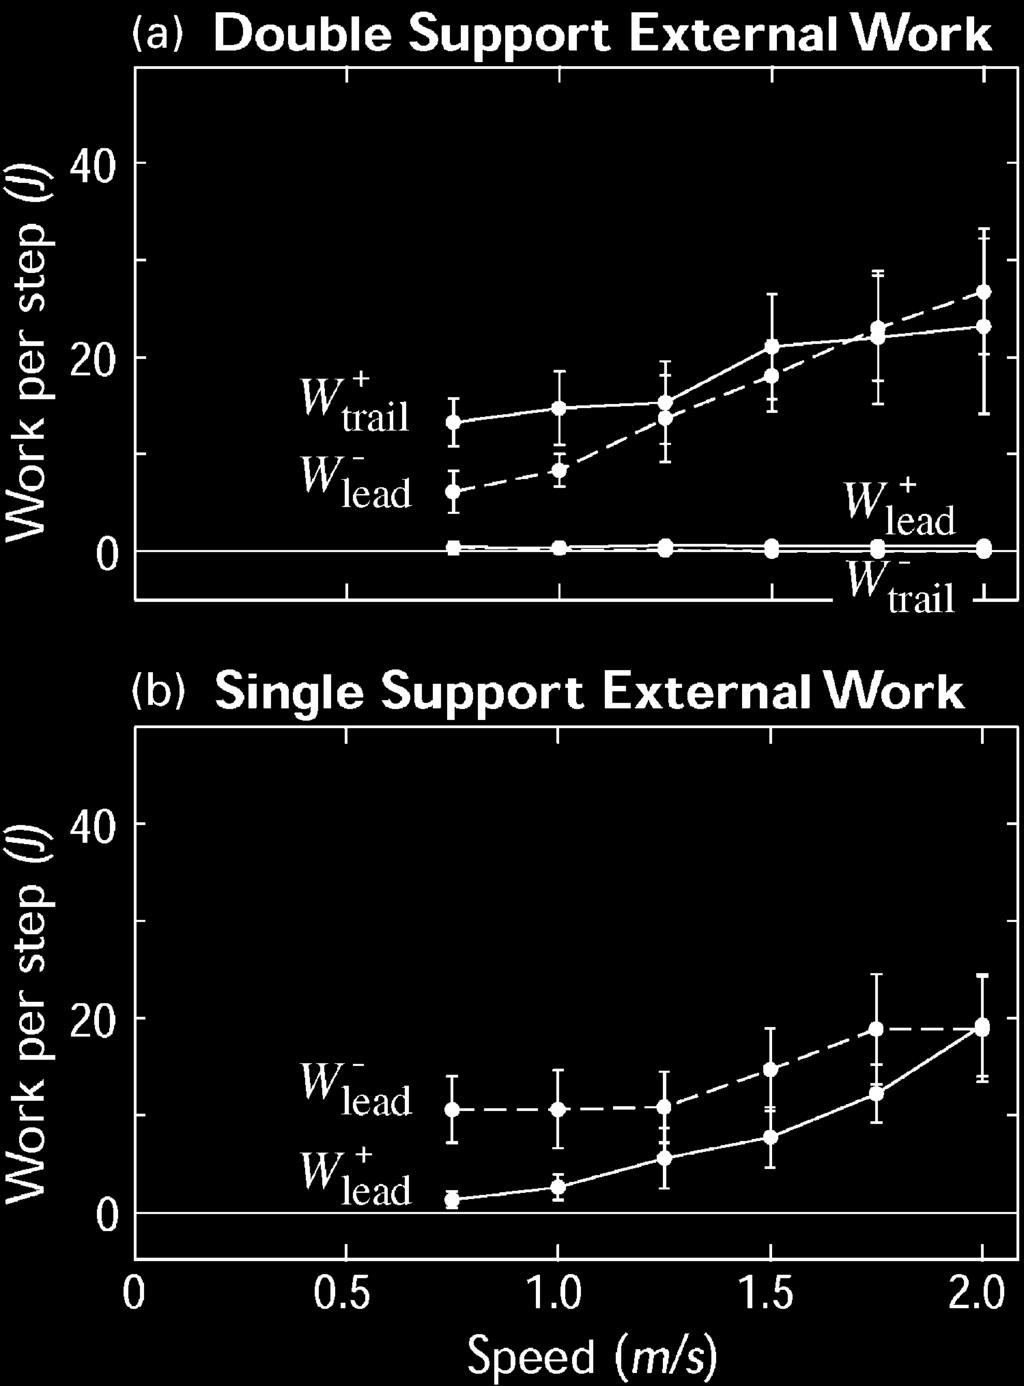 (a) Positive and negative external work performed during double support by the trailing and leading limbs as a function of walking speed.